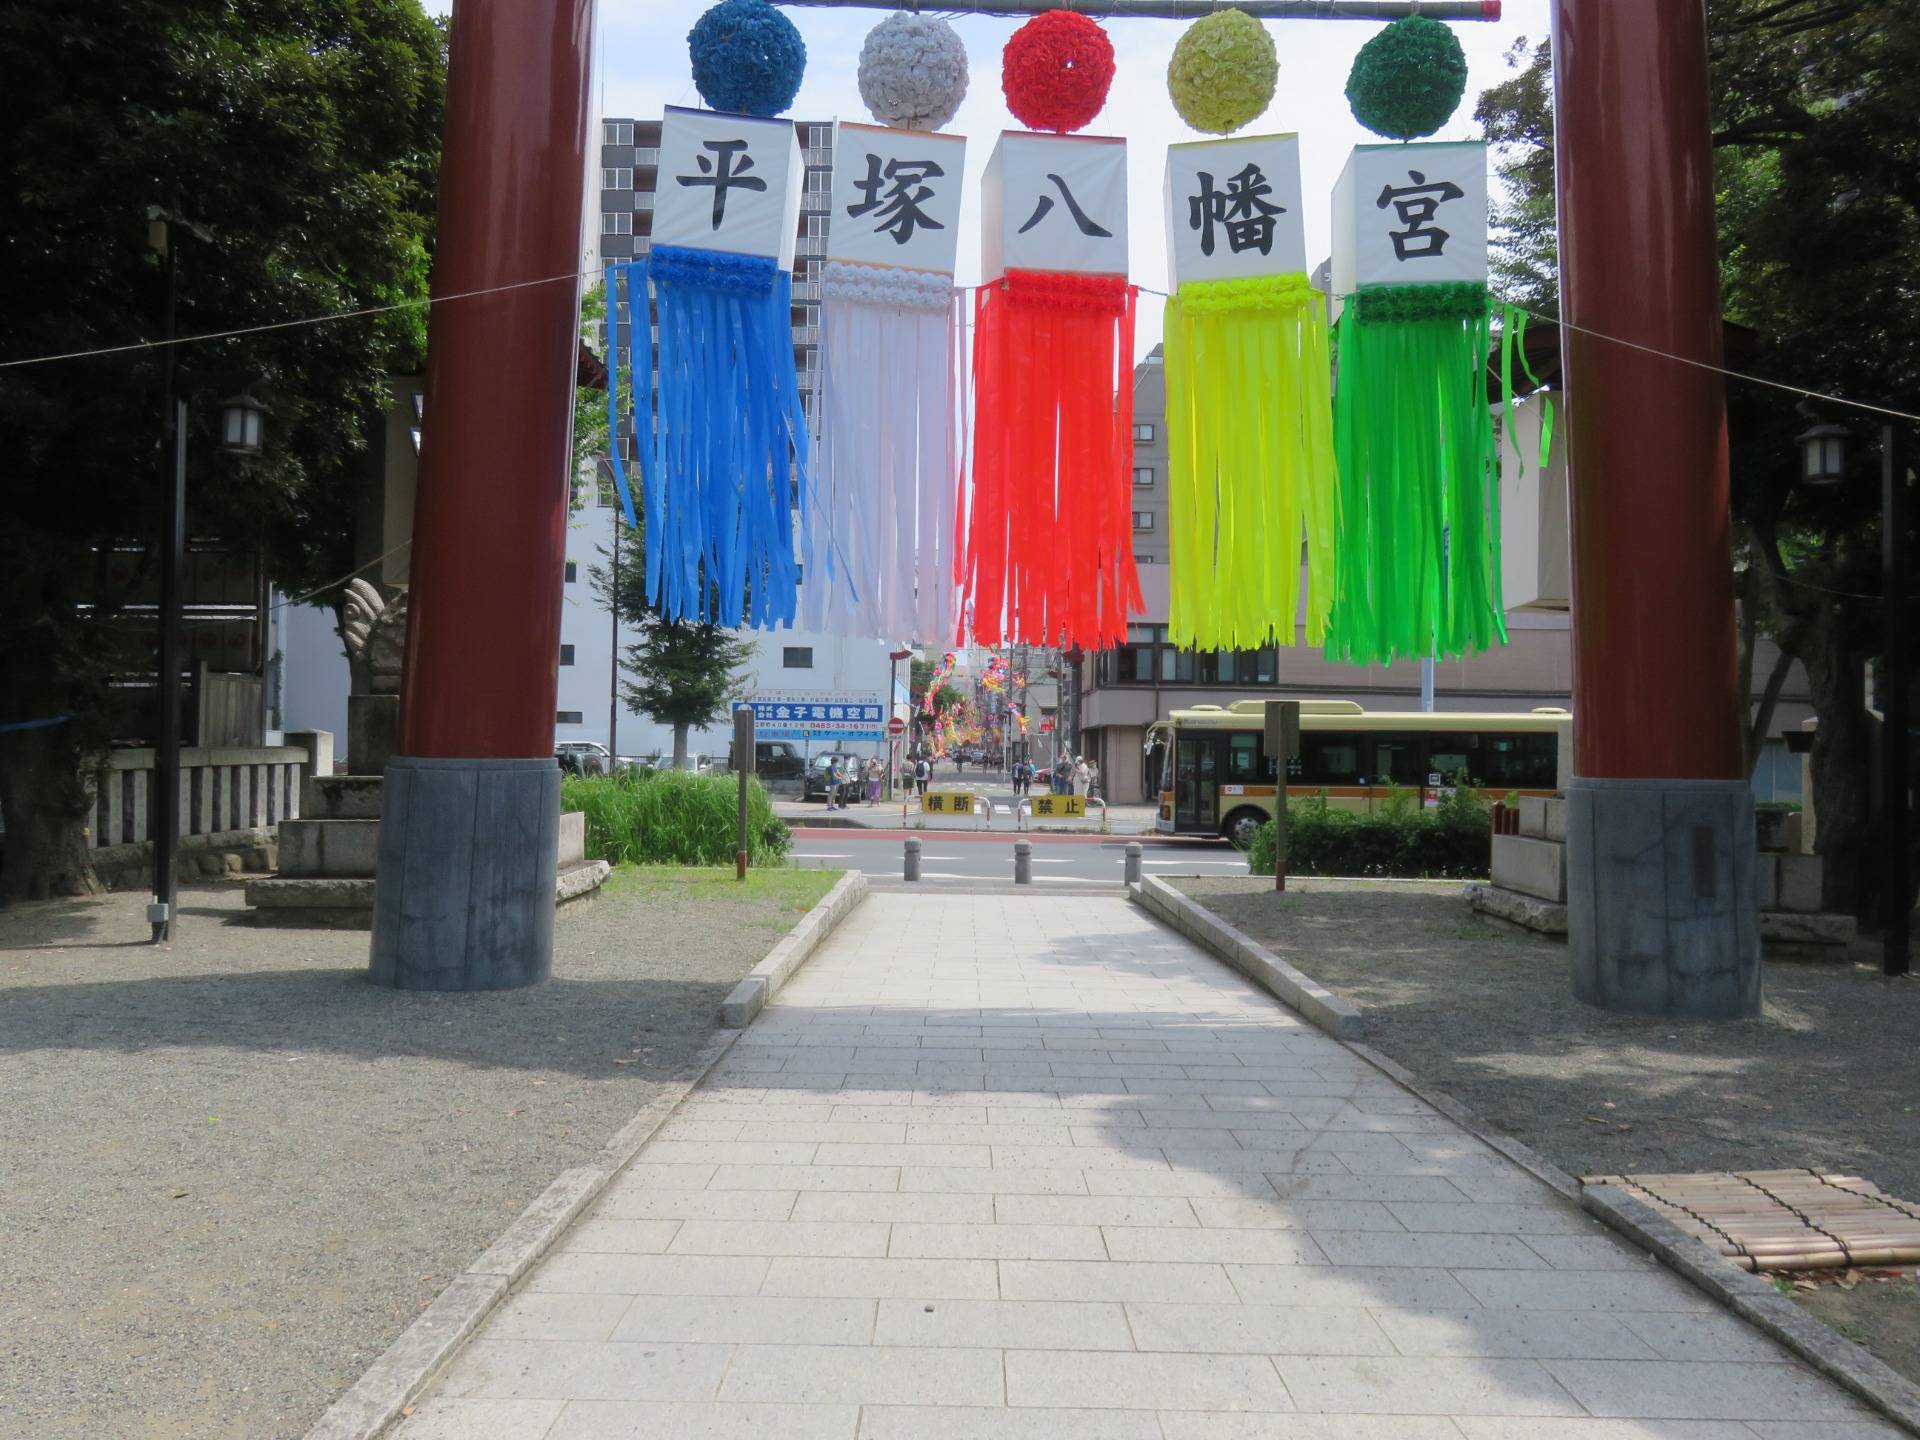 Hiratsuka Hachimangu Shrine, with the festival decorations on the red gate and in the distance.